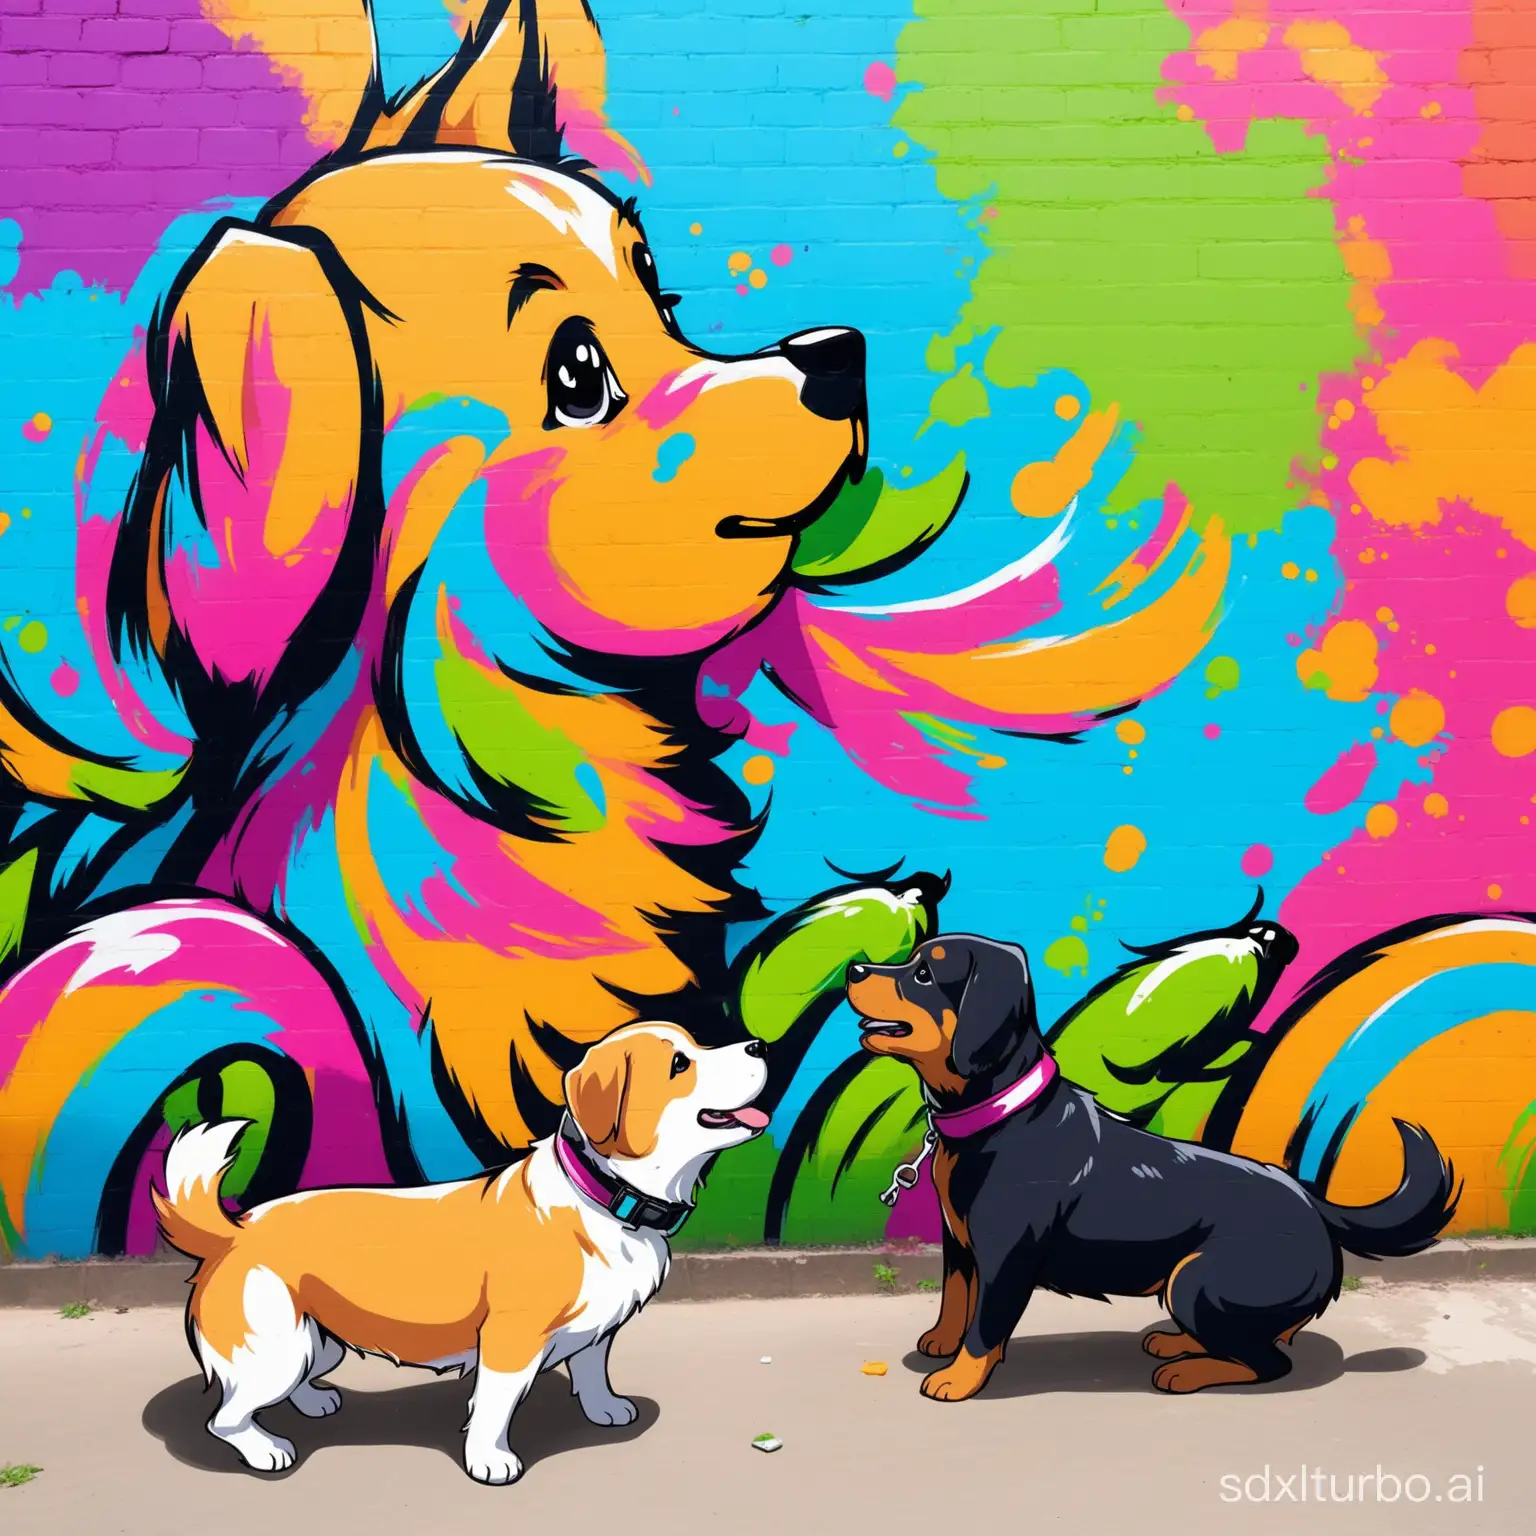 Draw a proffesional and colour full graffiti with nature and dogs playing happily 